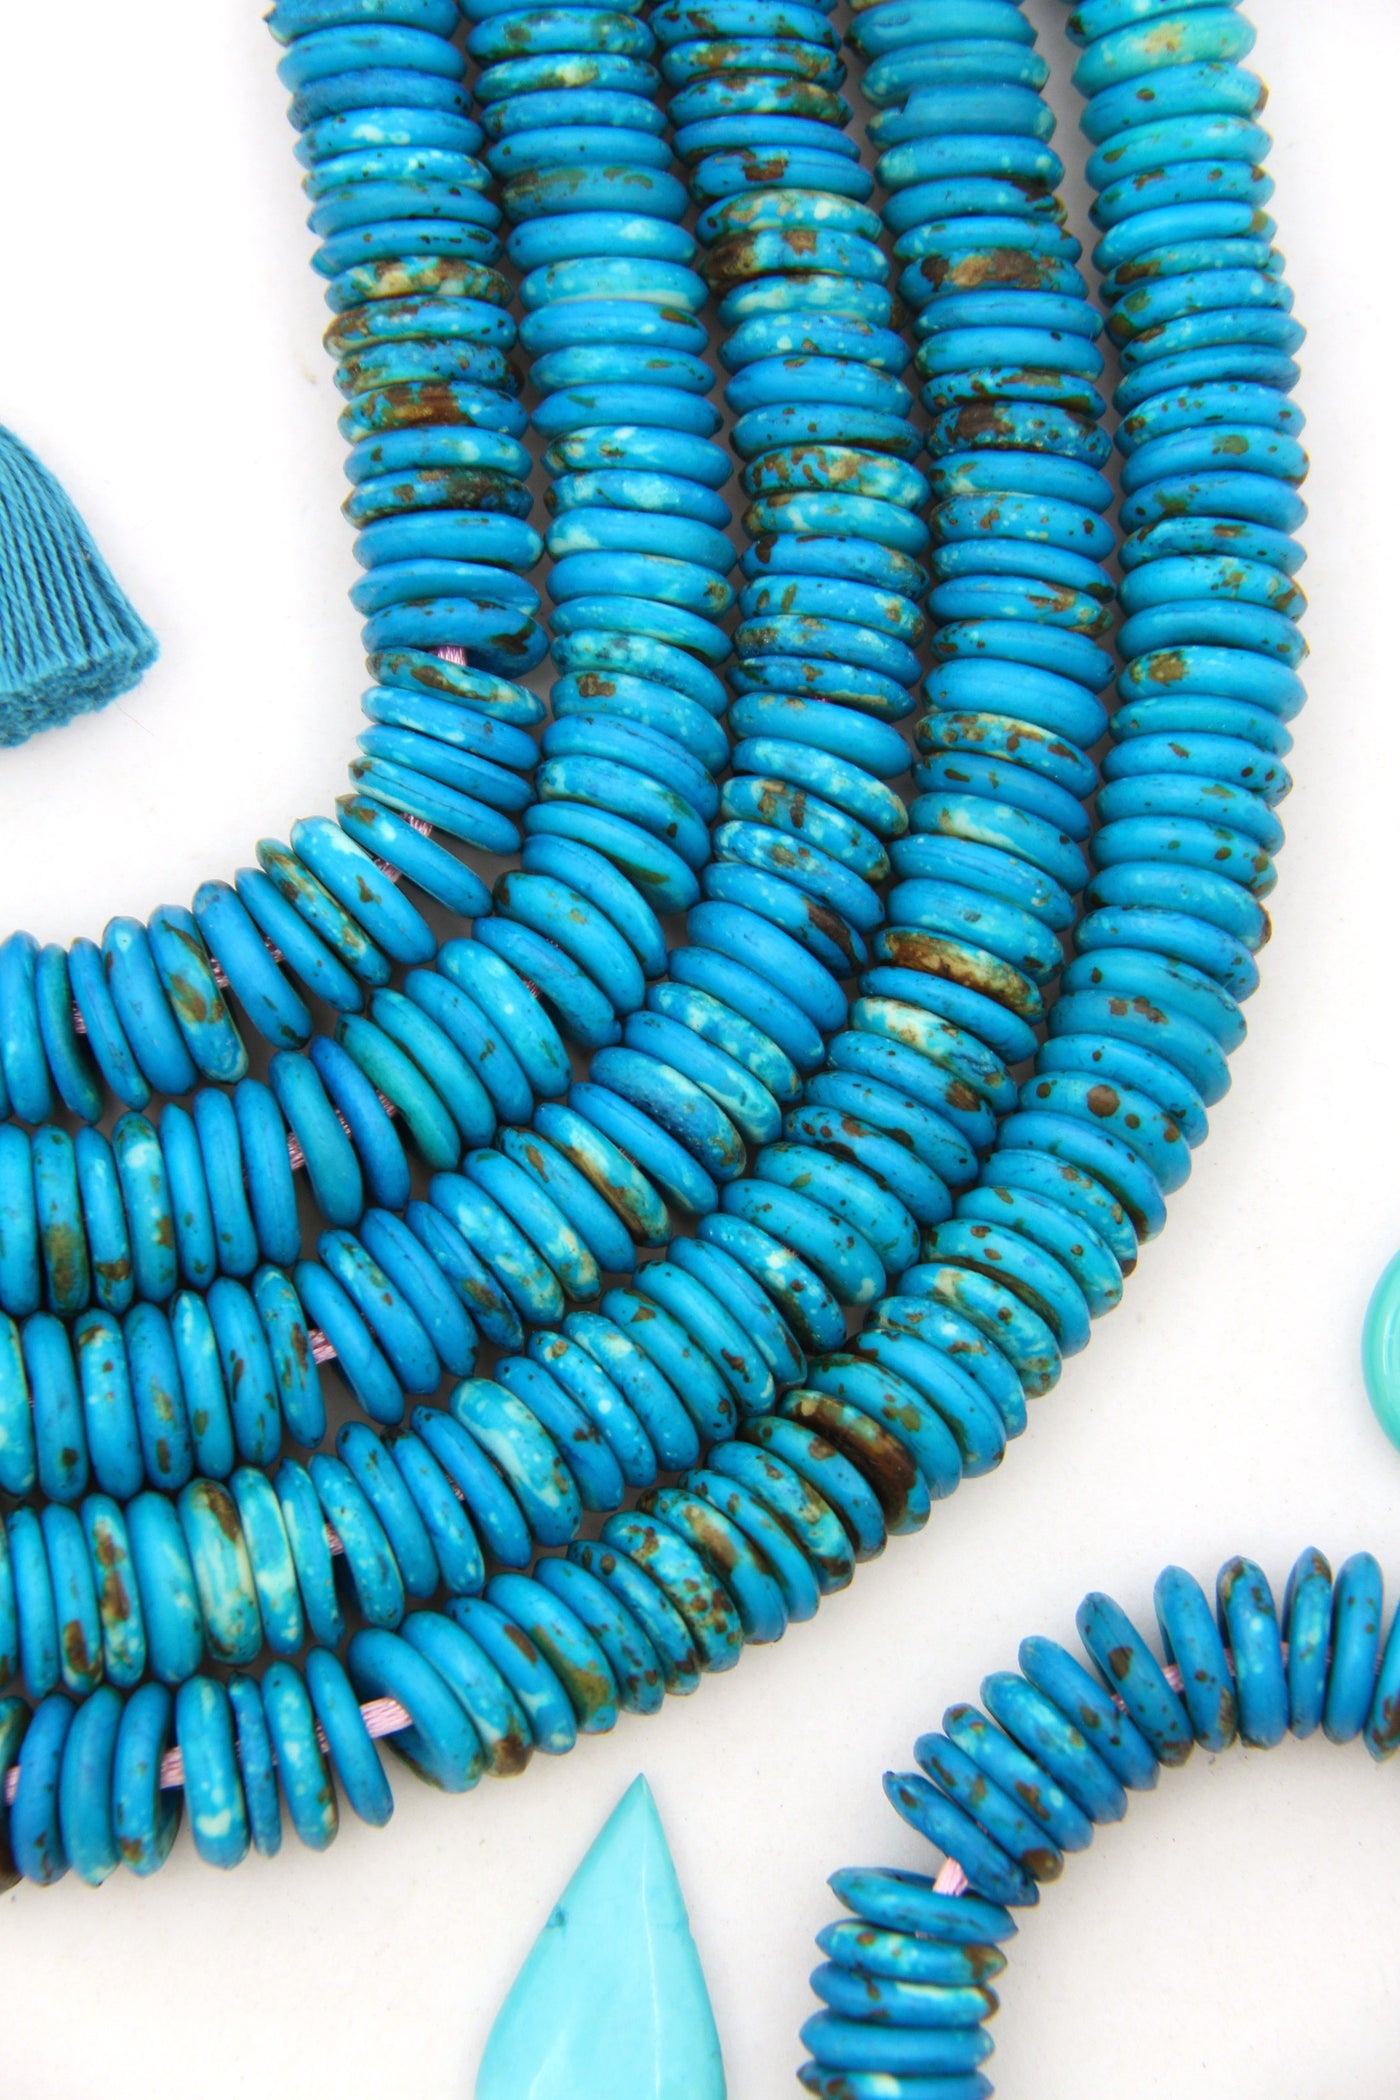 65 beads, for DIY Summer jewelry and making Outer Banks Friendship bracelets